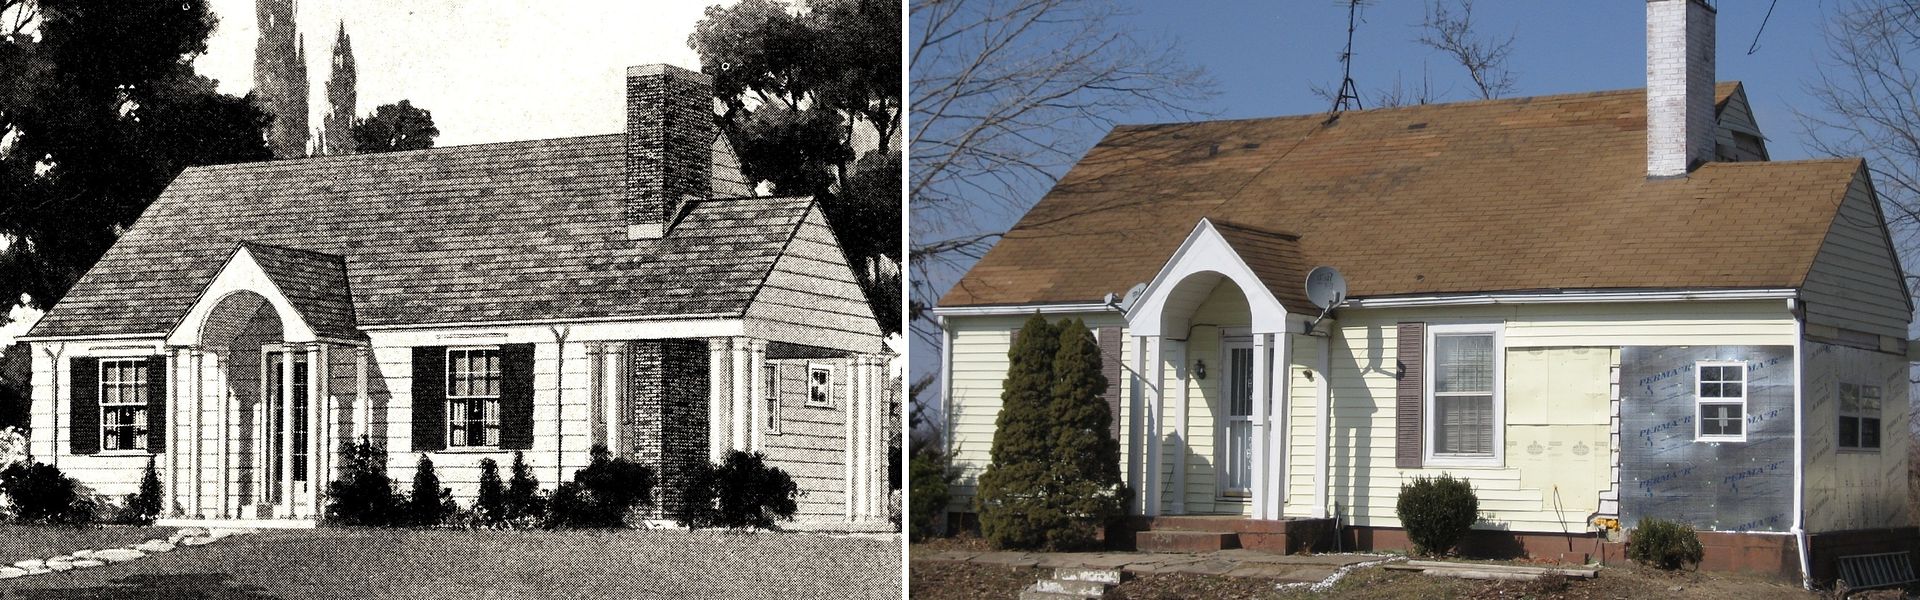 Comparison of the two houses. 